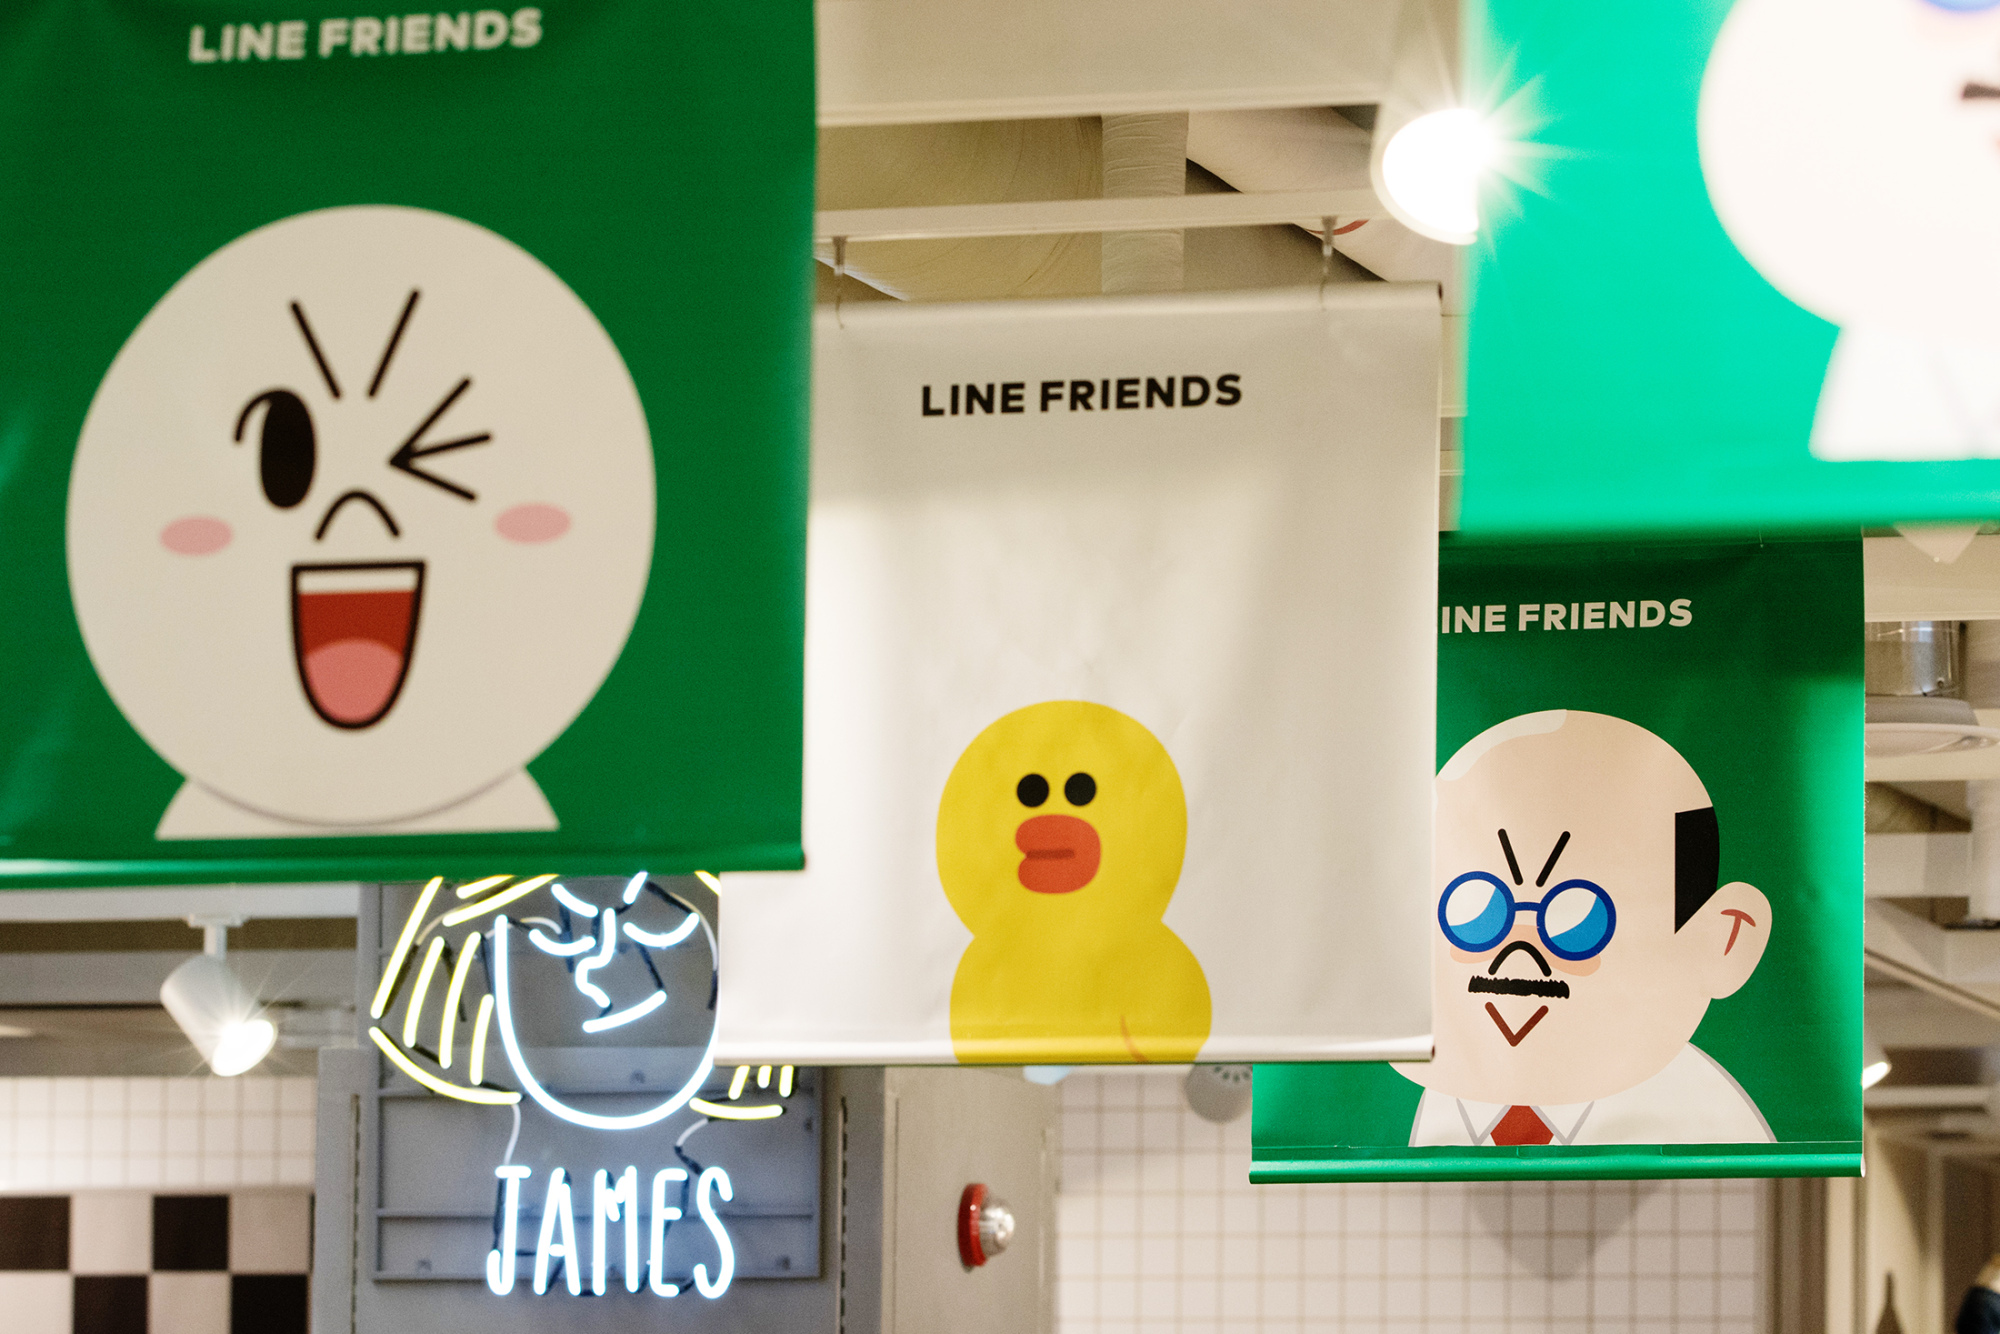 The Line Friends flagship store in the Itaewon district in Seoul, South Korea, on June, 11, 2016.
